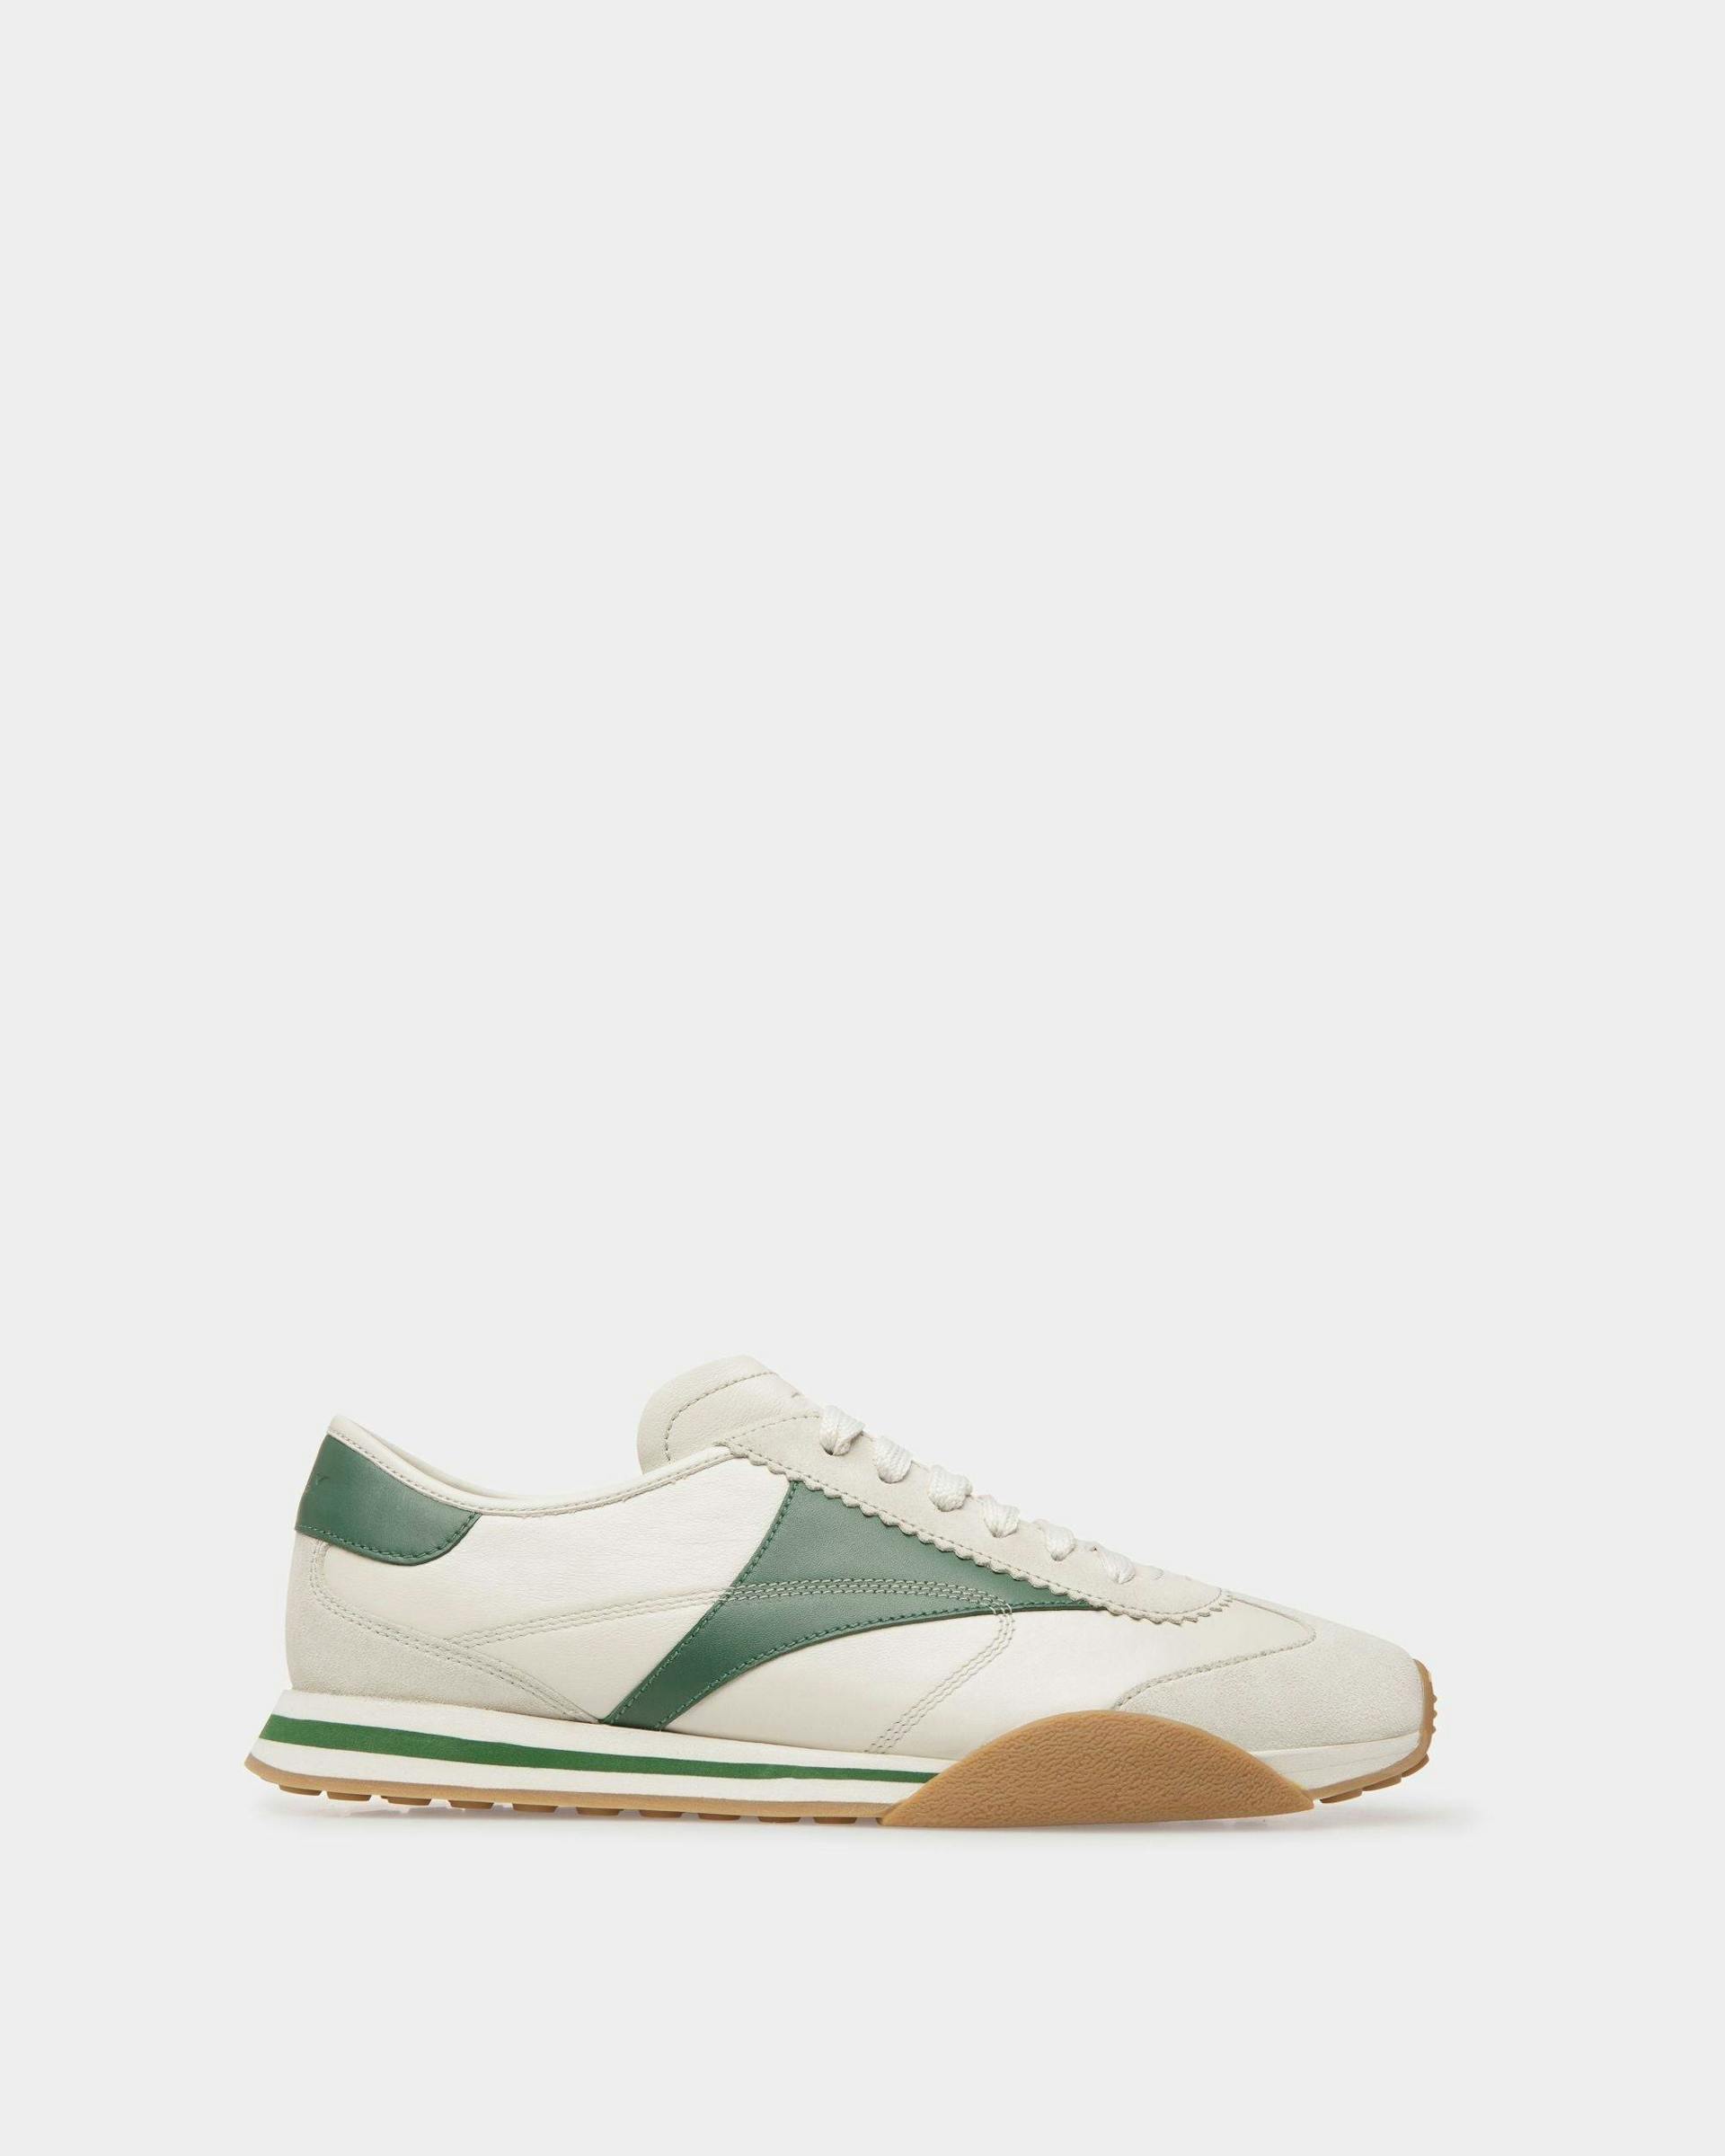 Sonney | Men's Sneakers | Dusty White And Kelly Green Leather| Bally